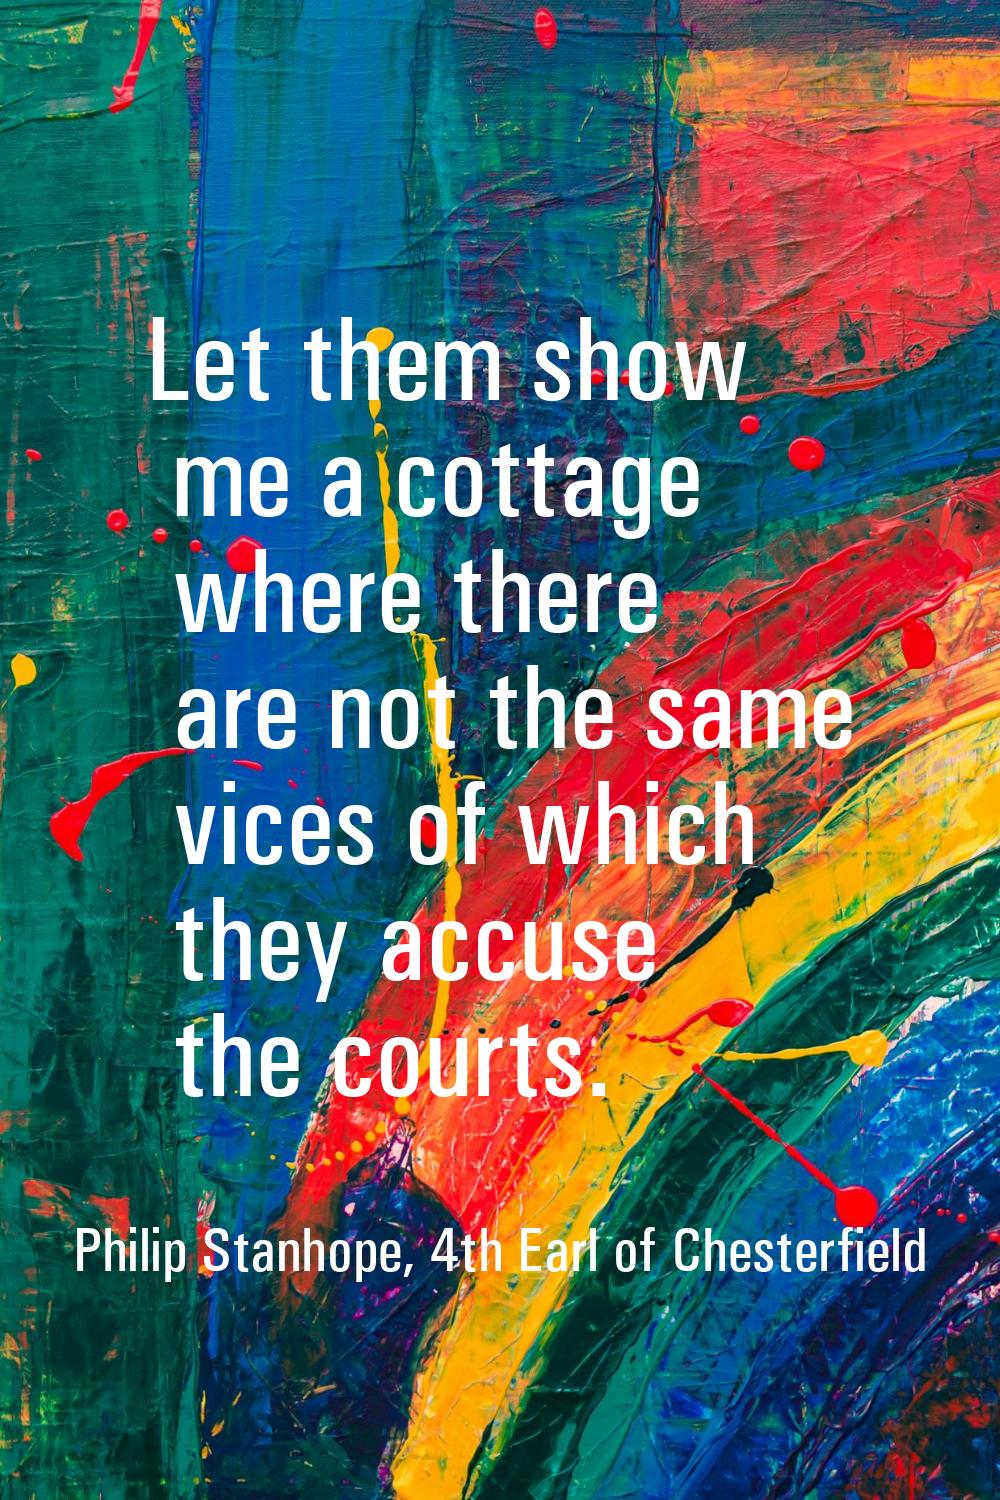 Let them show me a cottage where there are not the same vices of which they accuse the courts.